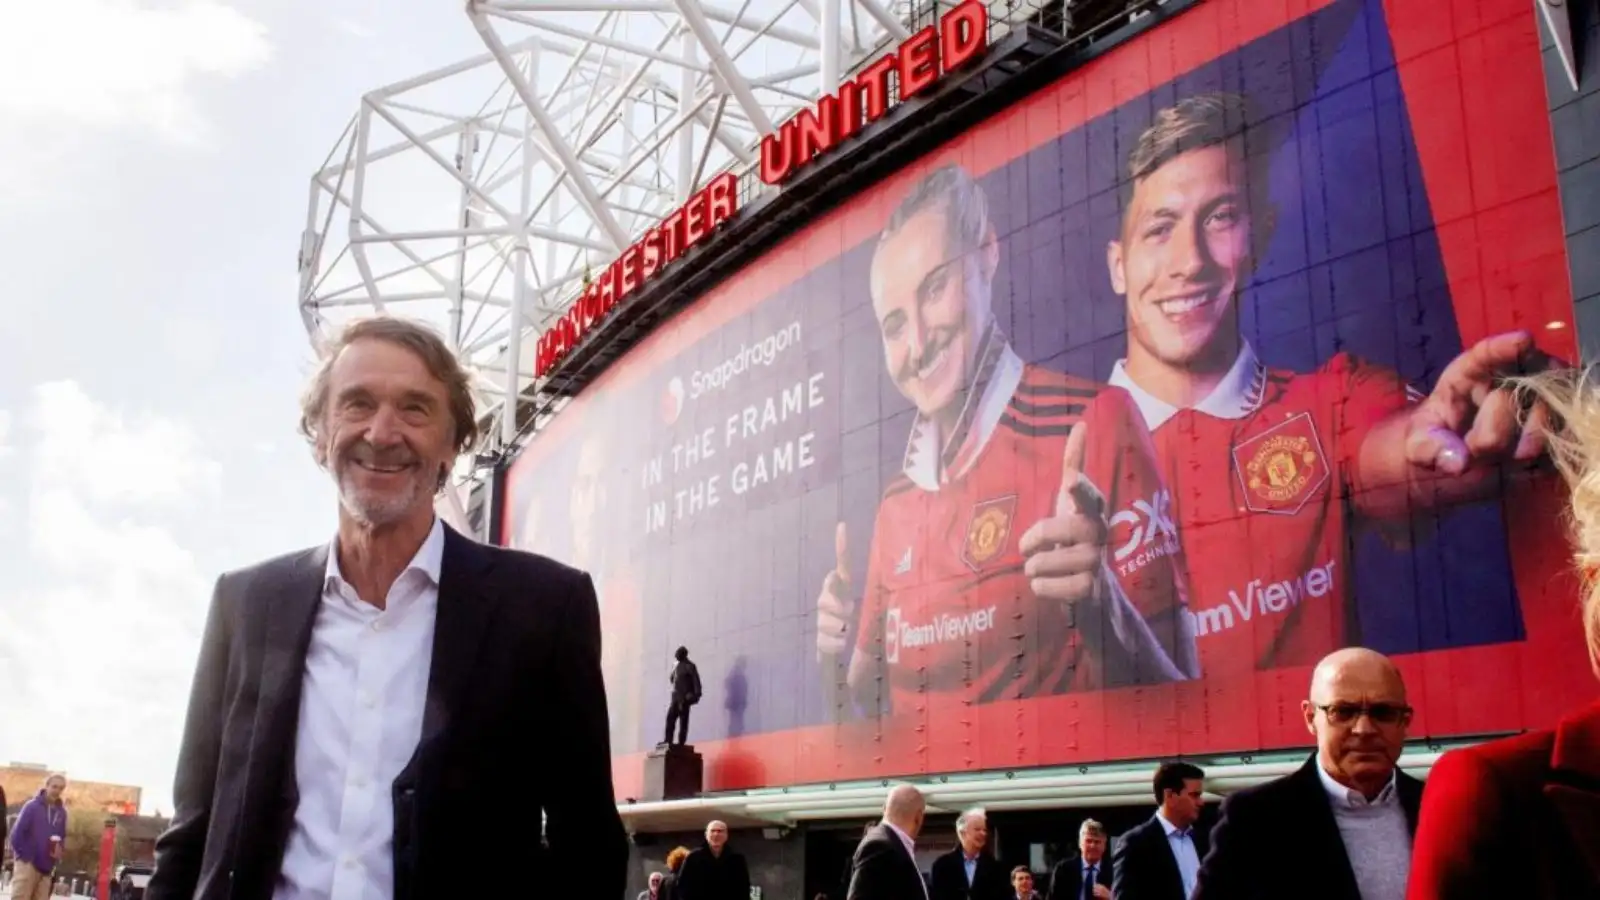 Potential Manchester Joined owner Sir Jim Ratcliffe during a consultation to Wear Trafford.